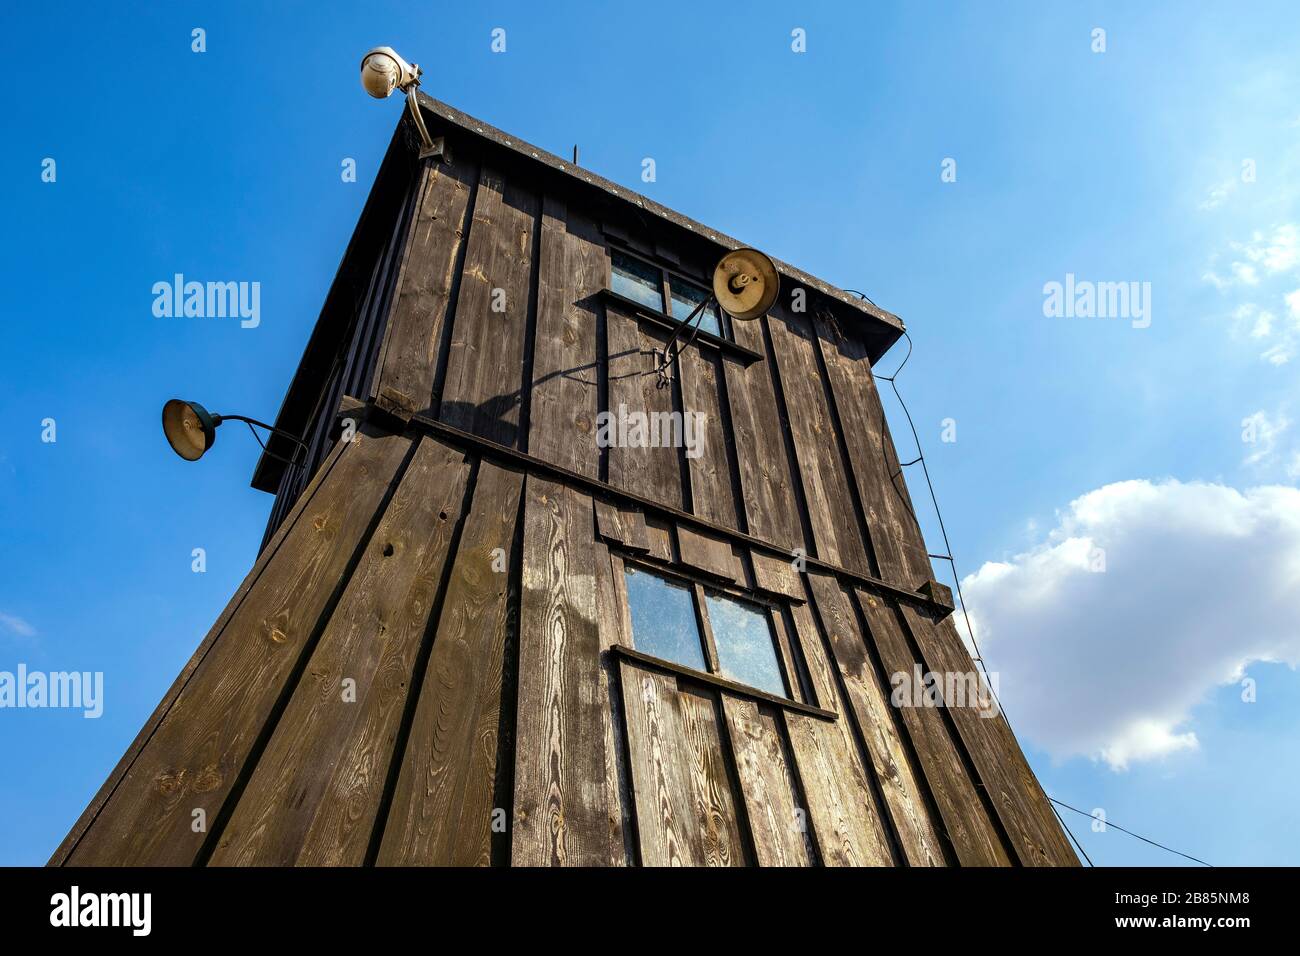 Lublin, Lubelskie / Poland - 2019/08/17: Guards watch tower in Majdanek KL Lublin Nazis concentration camp - Konzentrationslager Lublin Stock Photo